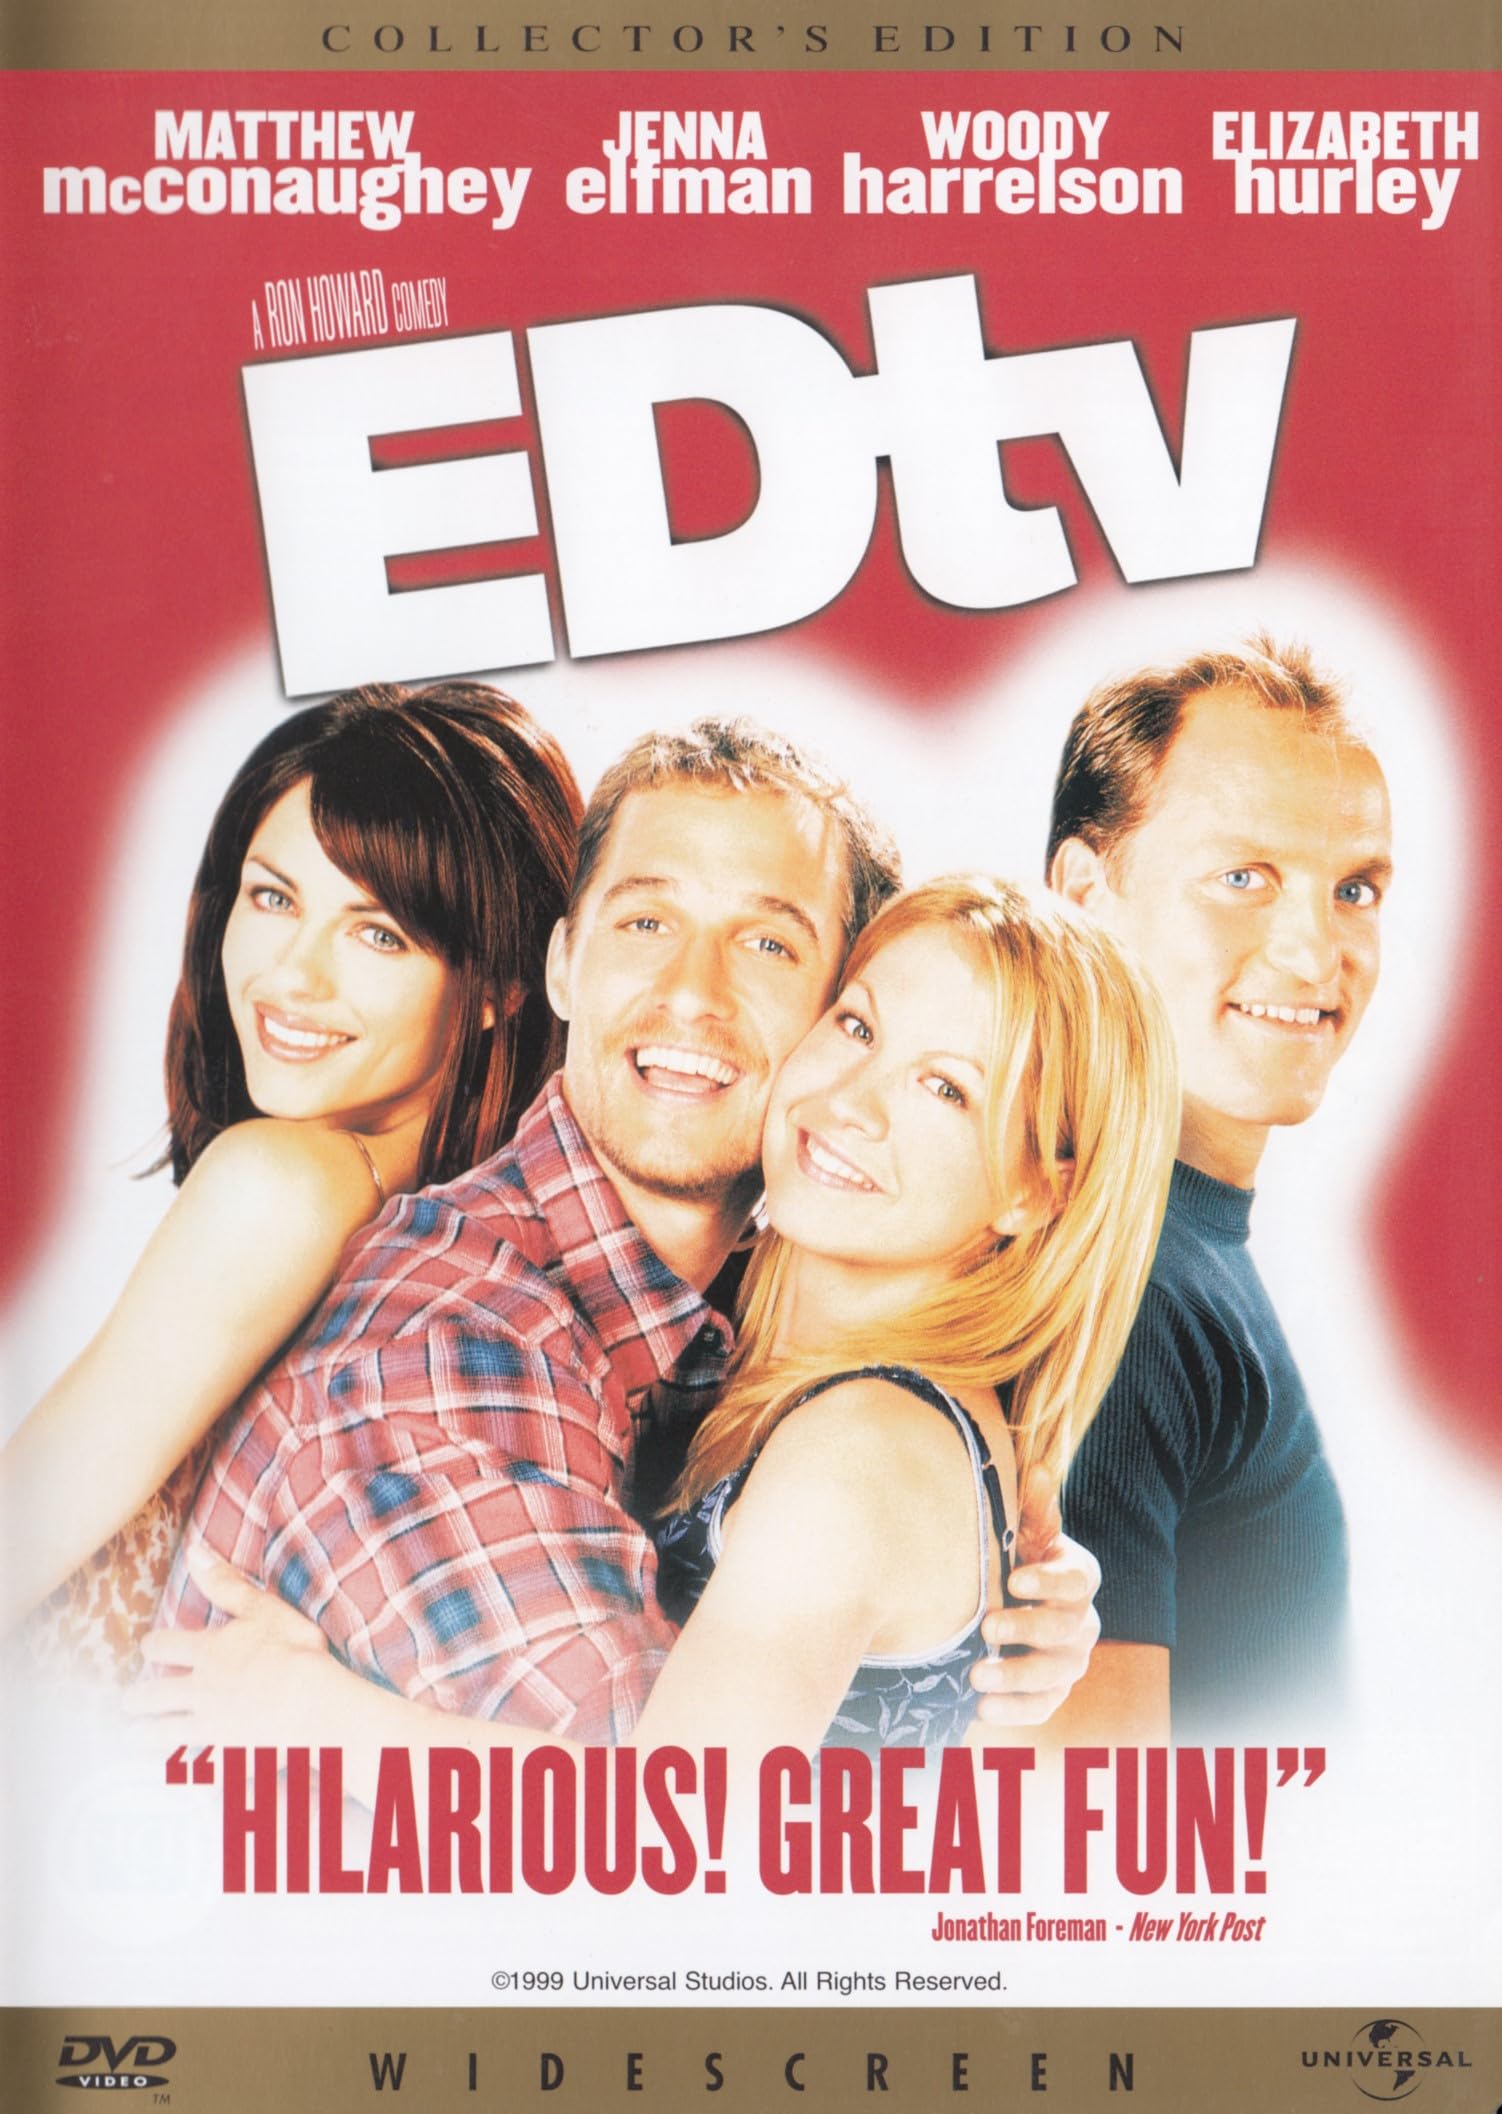 EdTV (Widescreen Collector’s Edition) on MovieShack